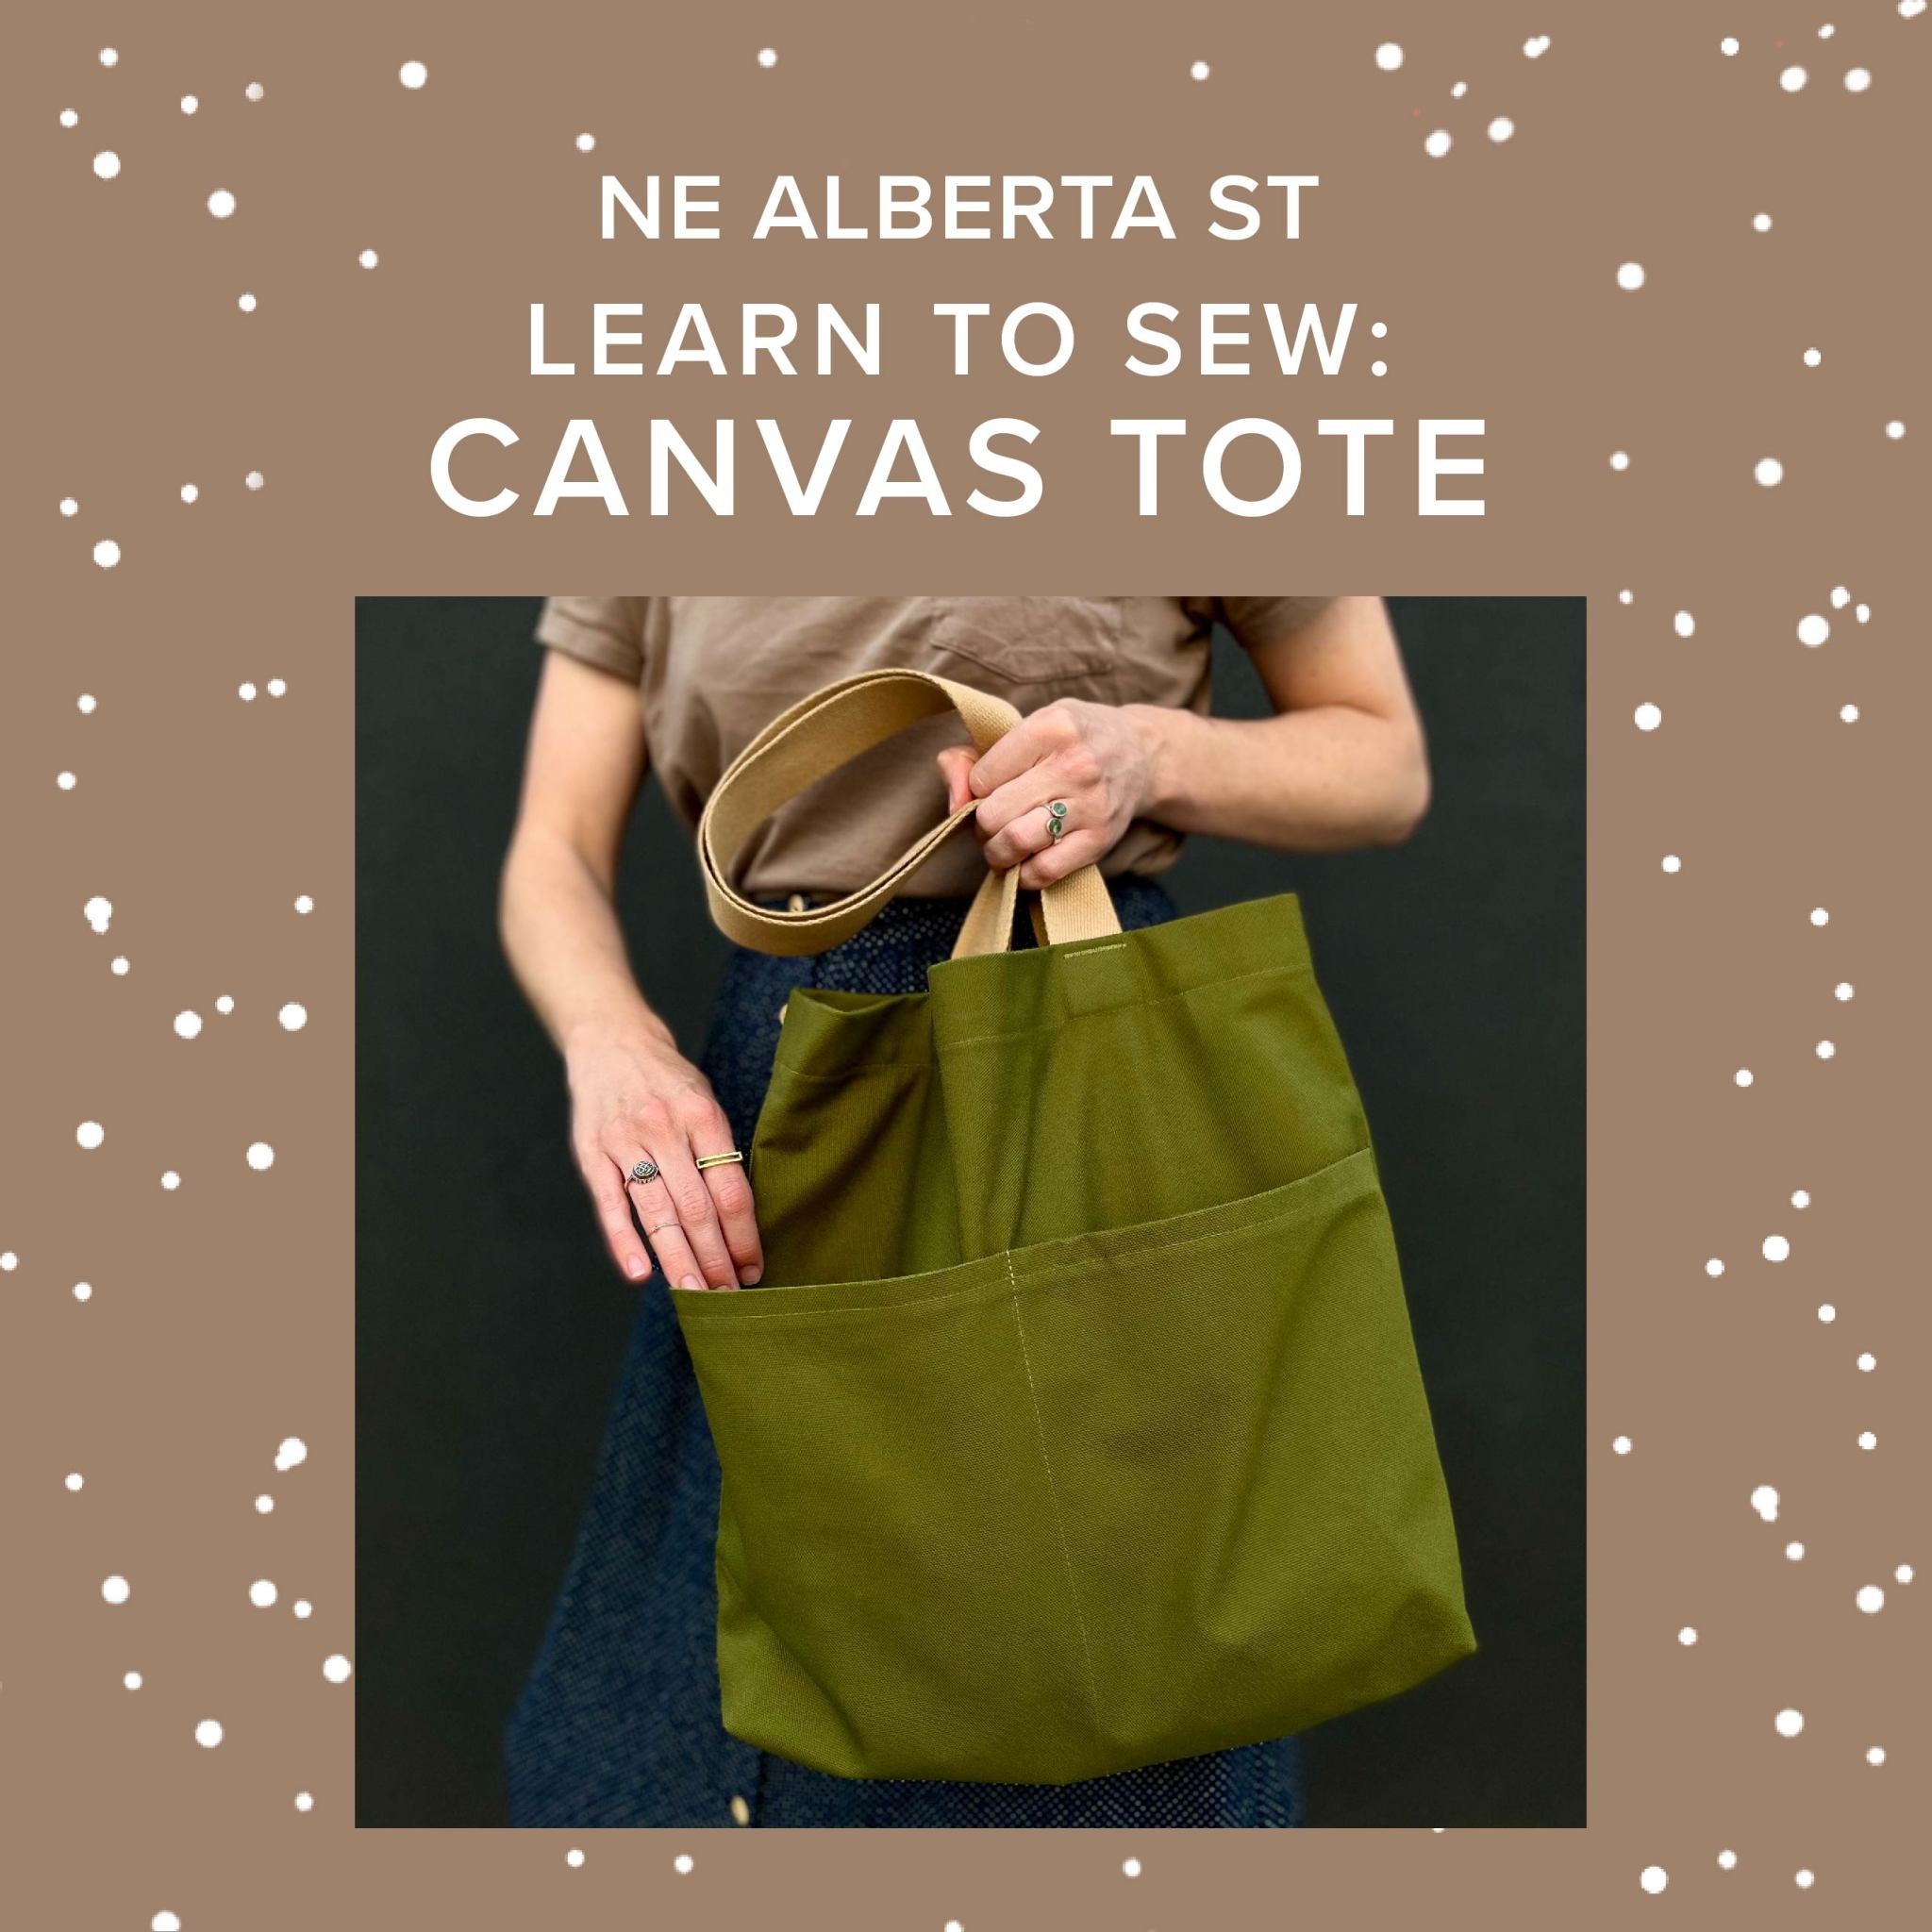 Rachel Halse CLASS FULL! Learn to Sew: Canvas Tote, Sunday, April 28th, 10am-1pm